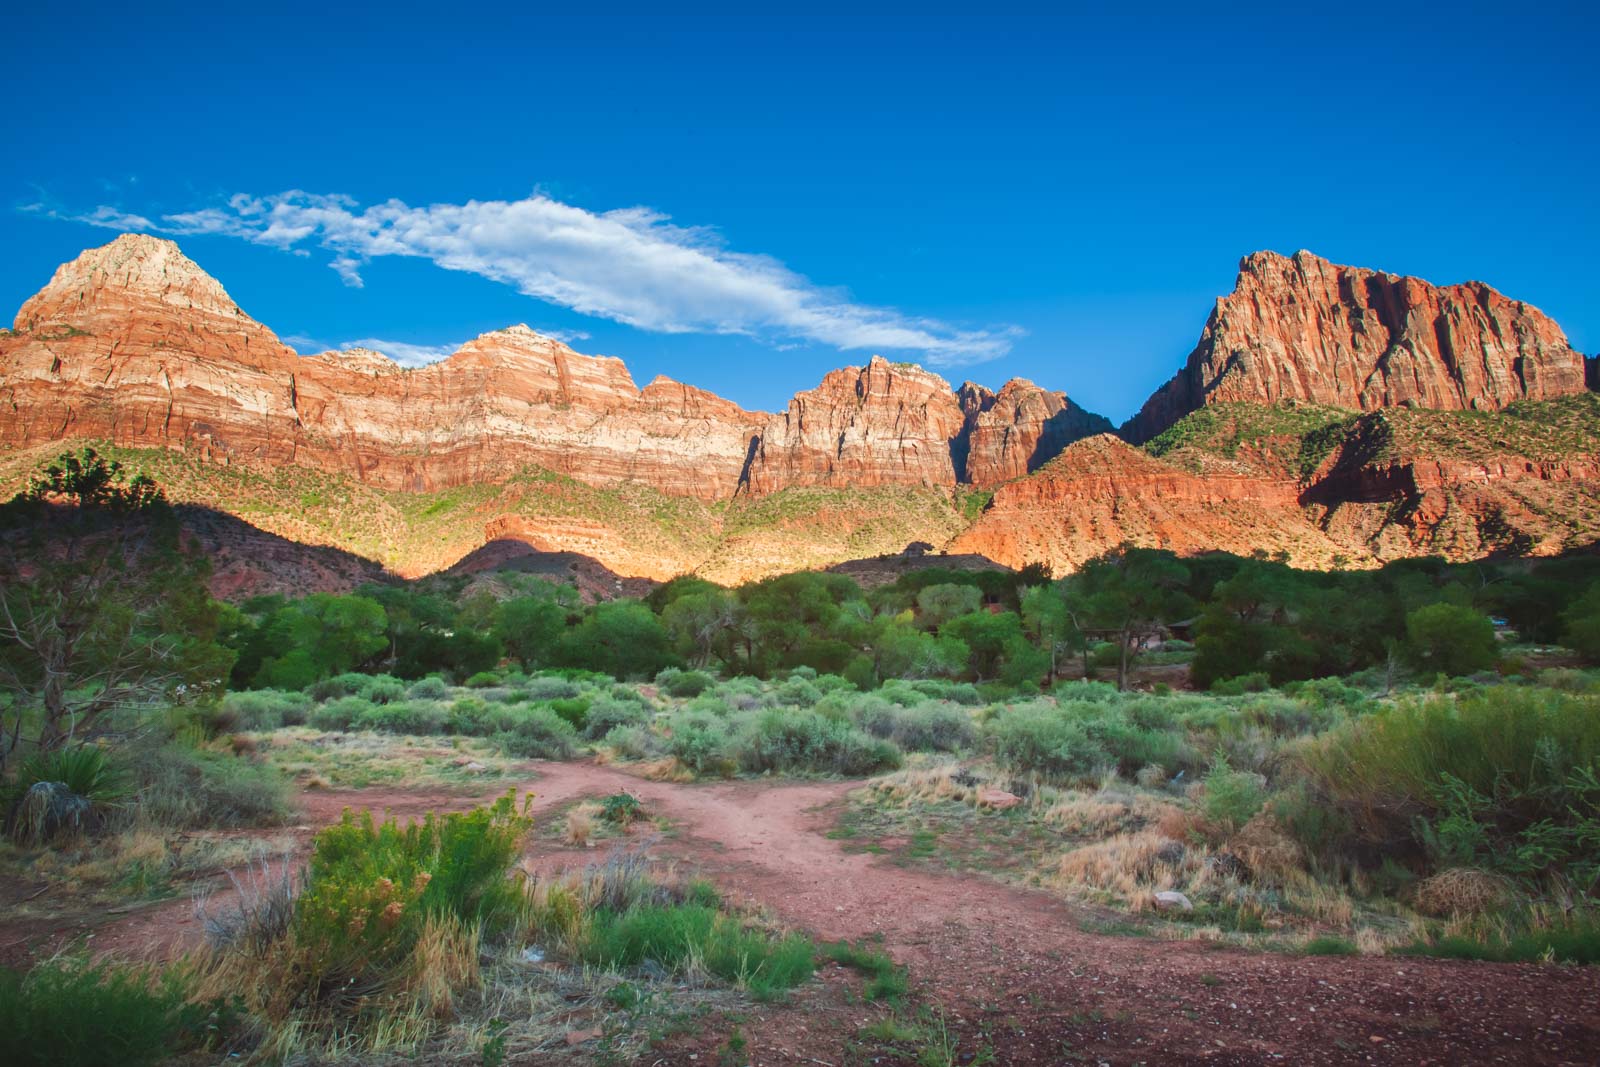 Where to Stay in Zion National Park - Your 2022 Guide